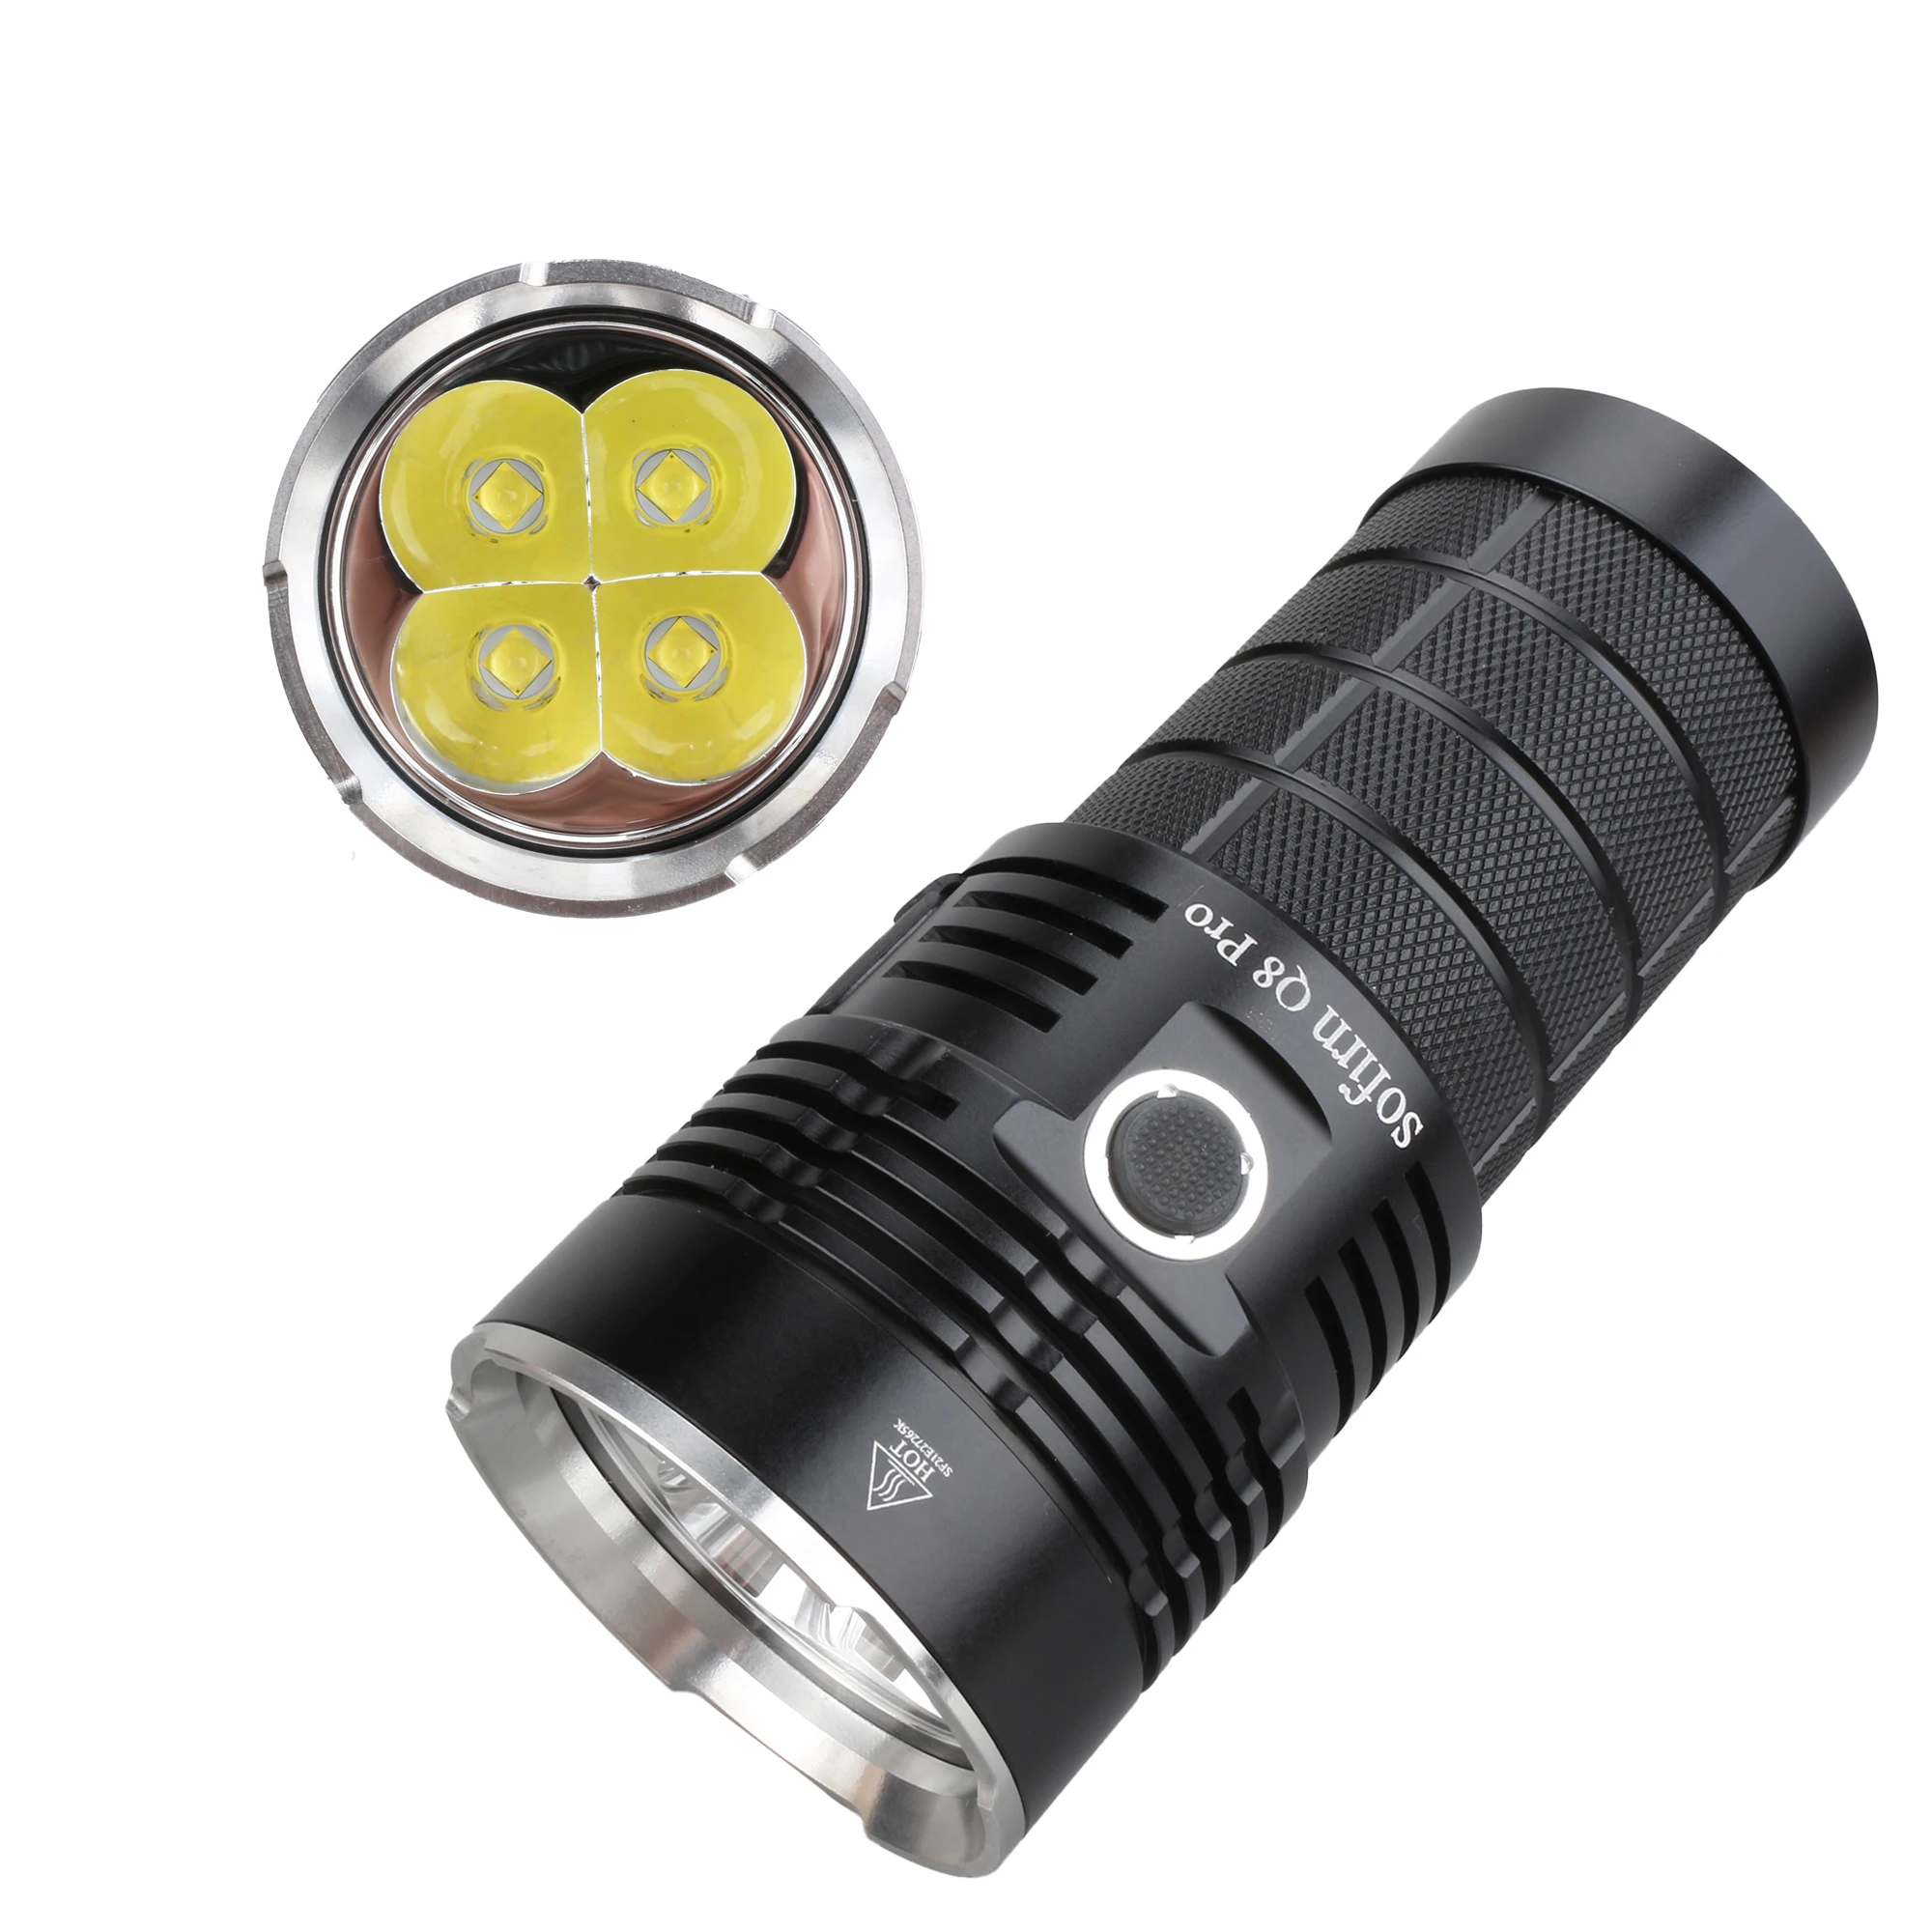 Sofirn Q8 Pro Powerful 11000 Lumen Built-in USB-C Rechargeale Port with 4* Cree XHP50.2 LEDs Anduril Flashlight